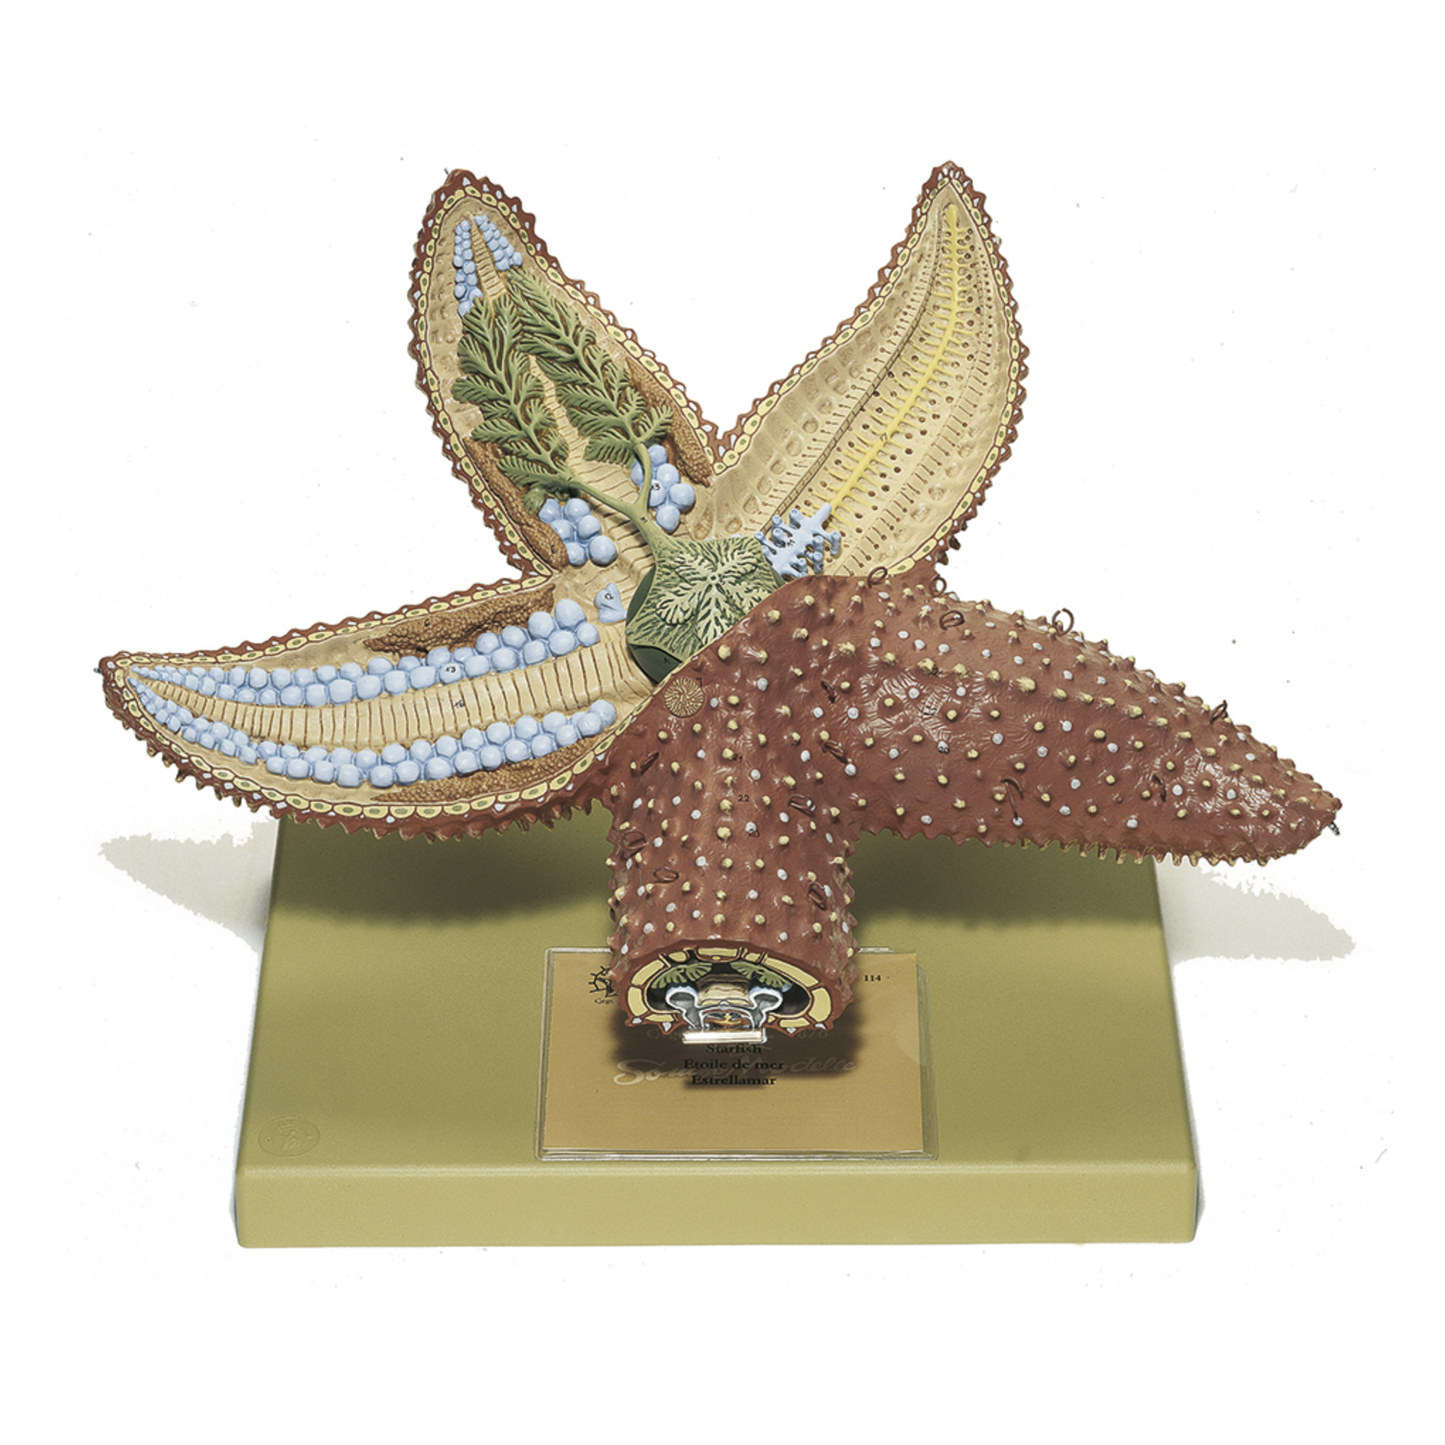 Model of a starfish (Asterias) in the highest quality and enlarged